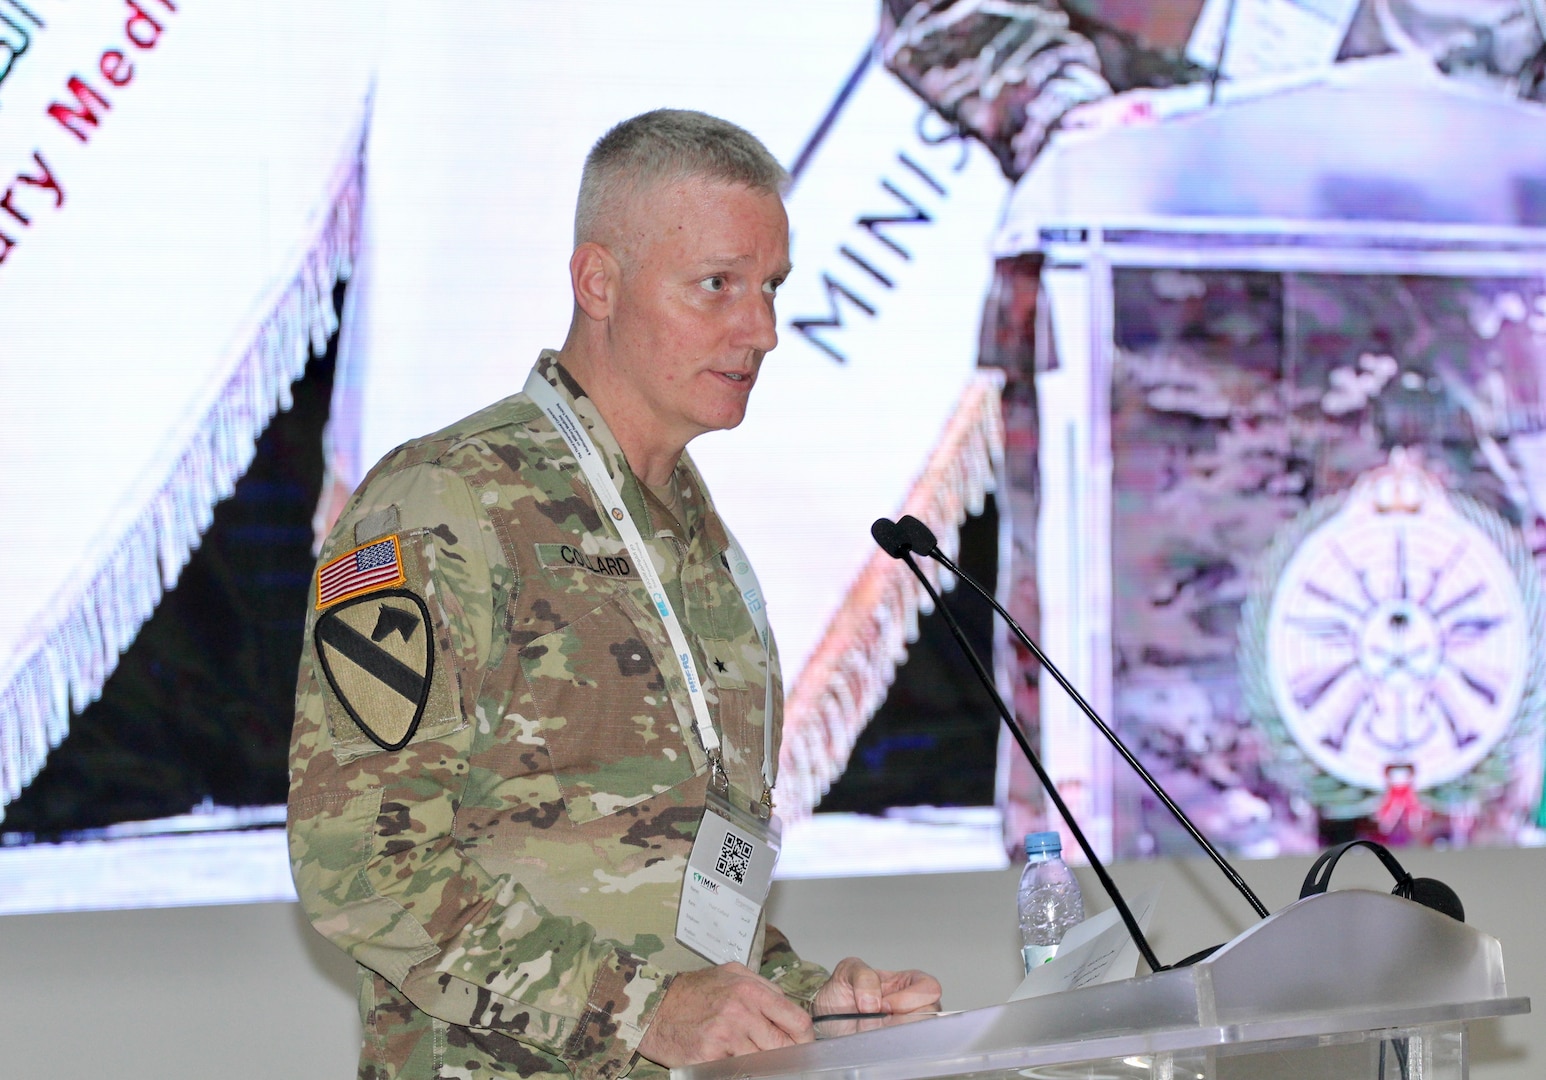 Army Reserve Medical Command’s Deputy Commanding General addresses partner nations and military members at the Multinational Medical Response Training in Riyadh, Saudi Arabia, Feb. 11-13, 2024.
Opened to both military and civilian personnel of U.S. partner states in the CENTCOM area of responsibility, the biennial event will feature speakers, workshops, exhibit displays, and a capstone field training exercise showcasing emergency medical readiness and response for disaster and humanitarian relief operations.
More than 500 healthcare professionals from 20 partner nations are expected to participate in the building endeavor geared toward establishing medical training that promotes burden-sharing possibilities mutual understanding. (U.S. Central Command)